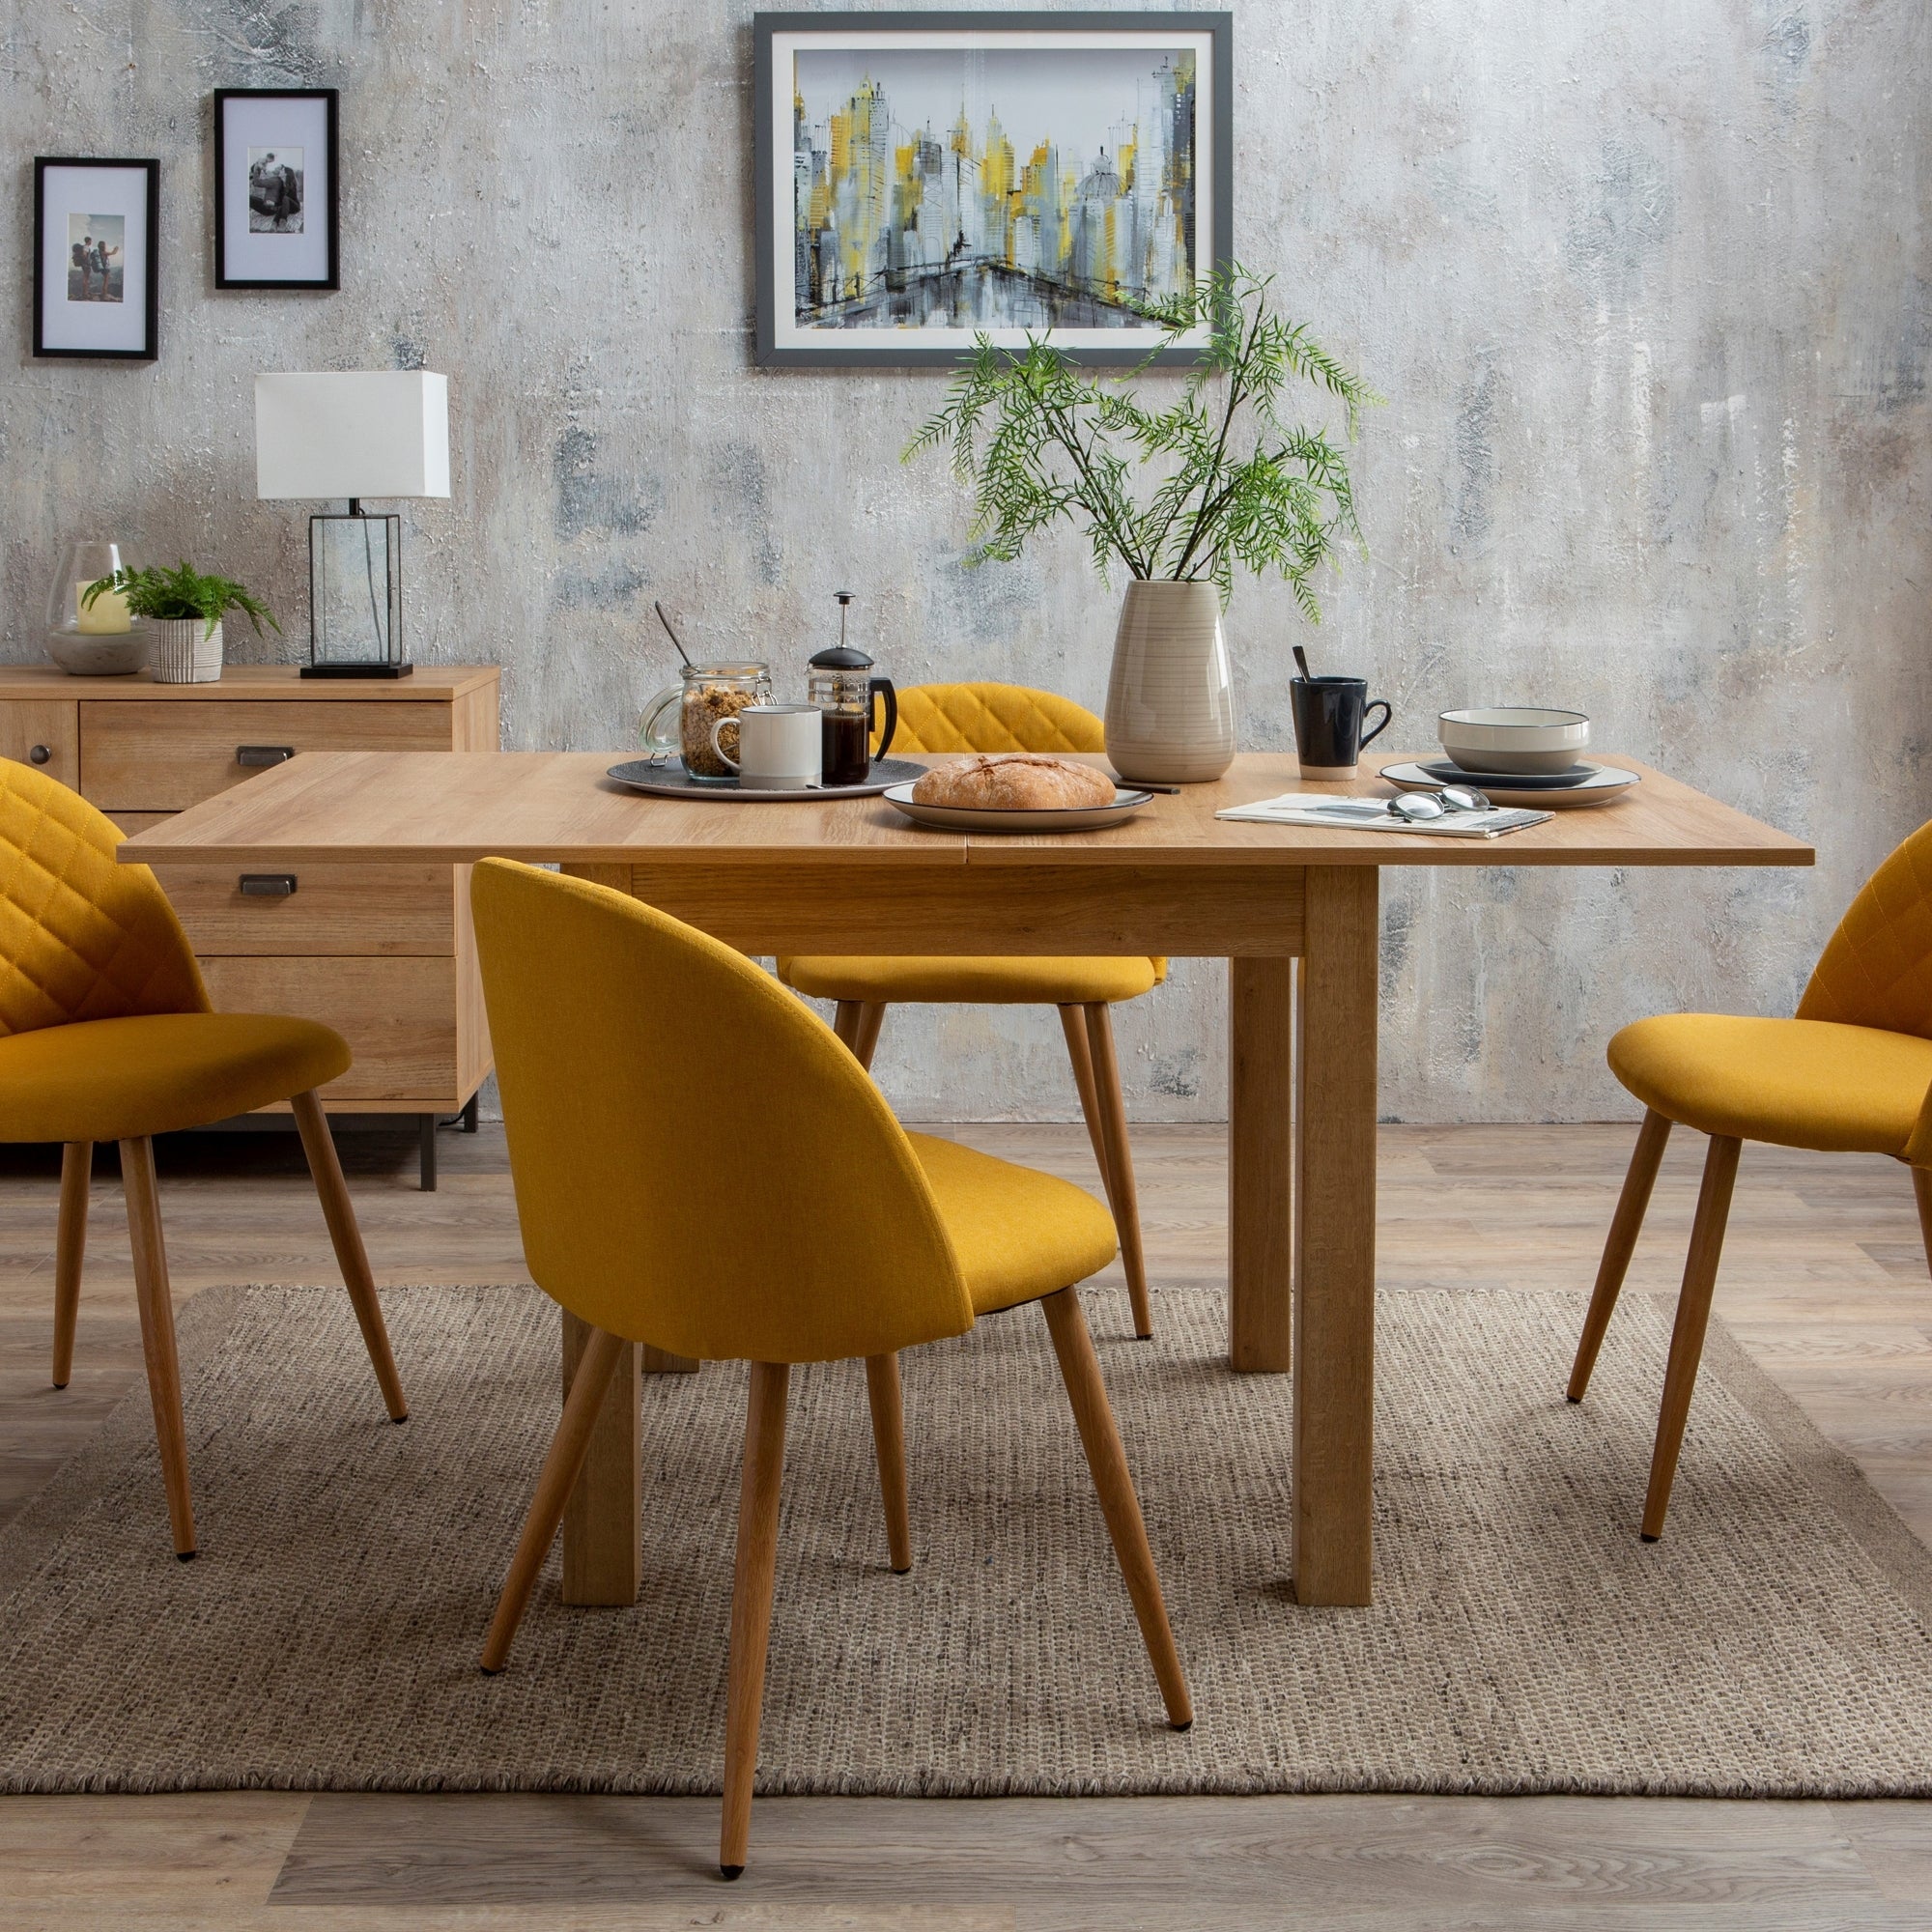 yellow dining chairs